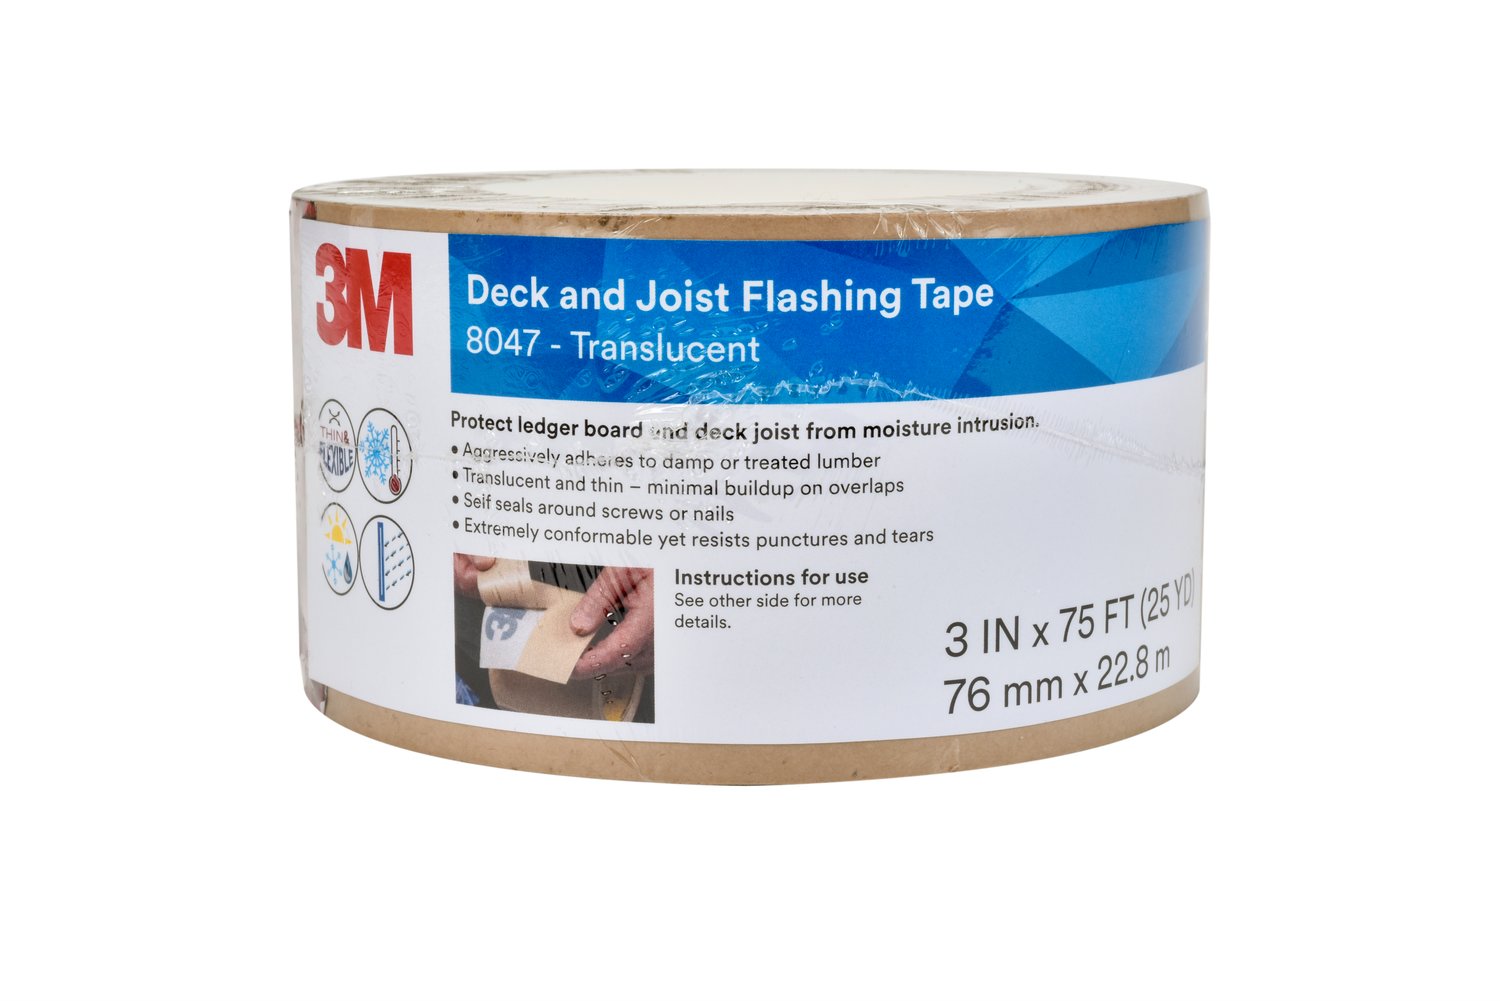 7010379532 - 3M Deck and Joist Flashing Tape 8047, Translucent, 3 in x 75 ft, 12
rolls per case, Solid Liner